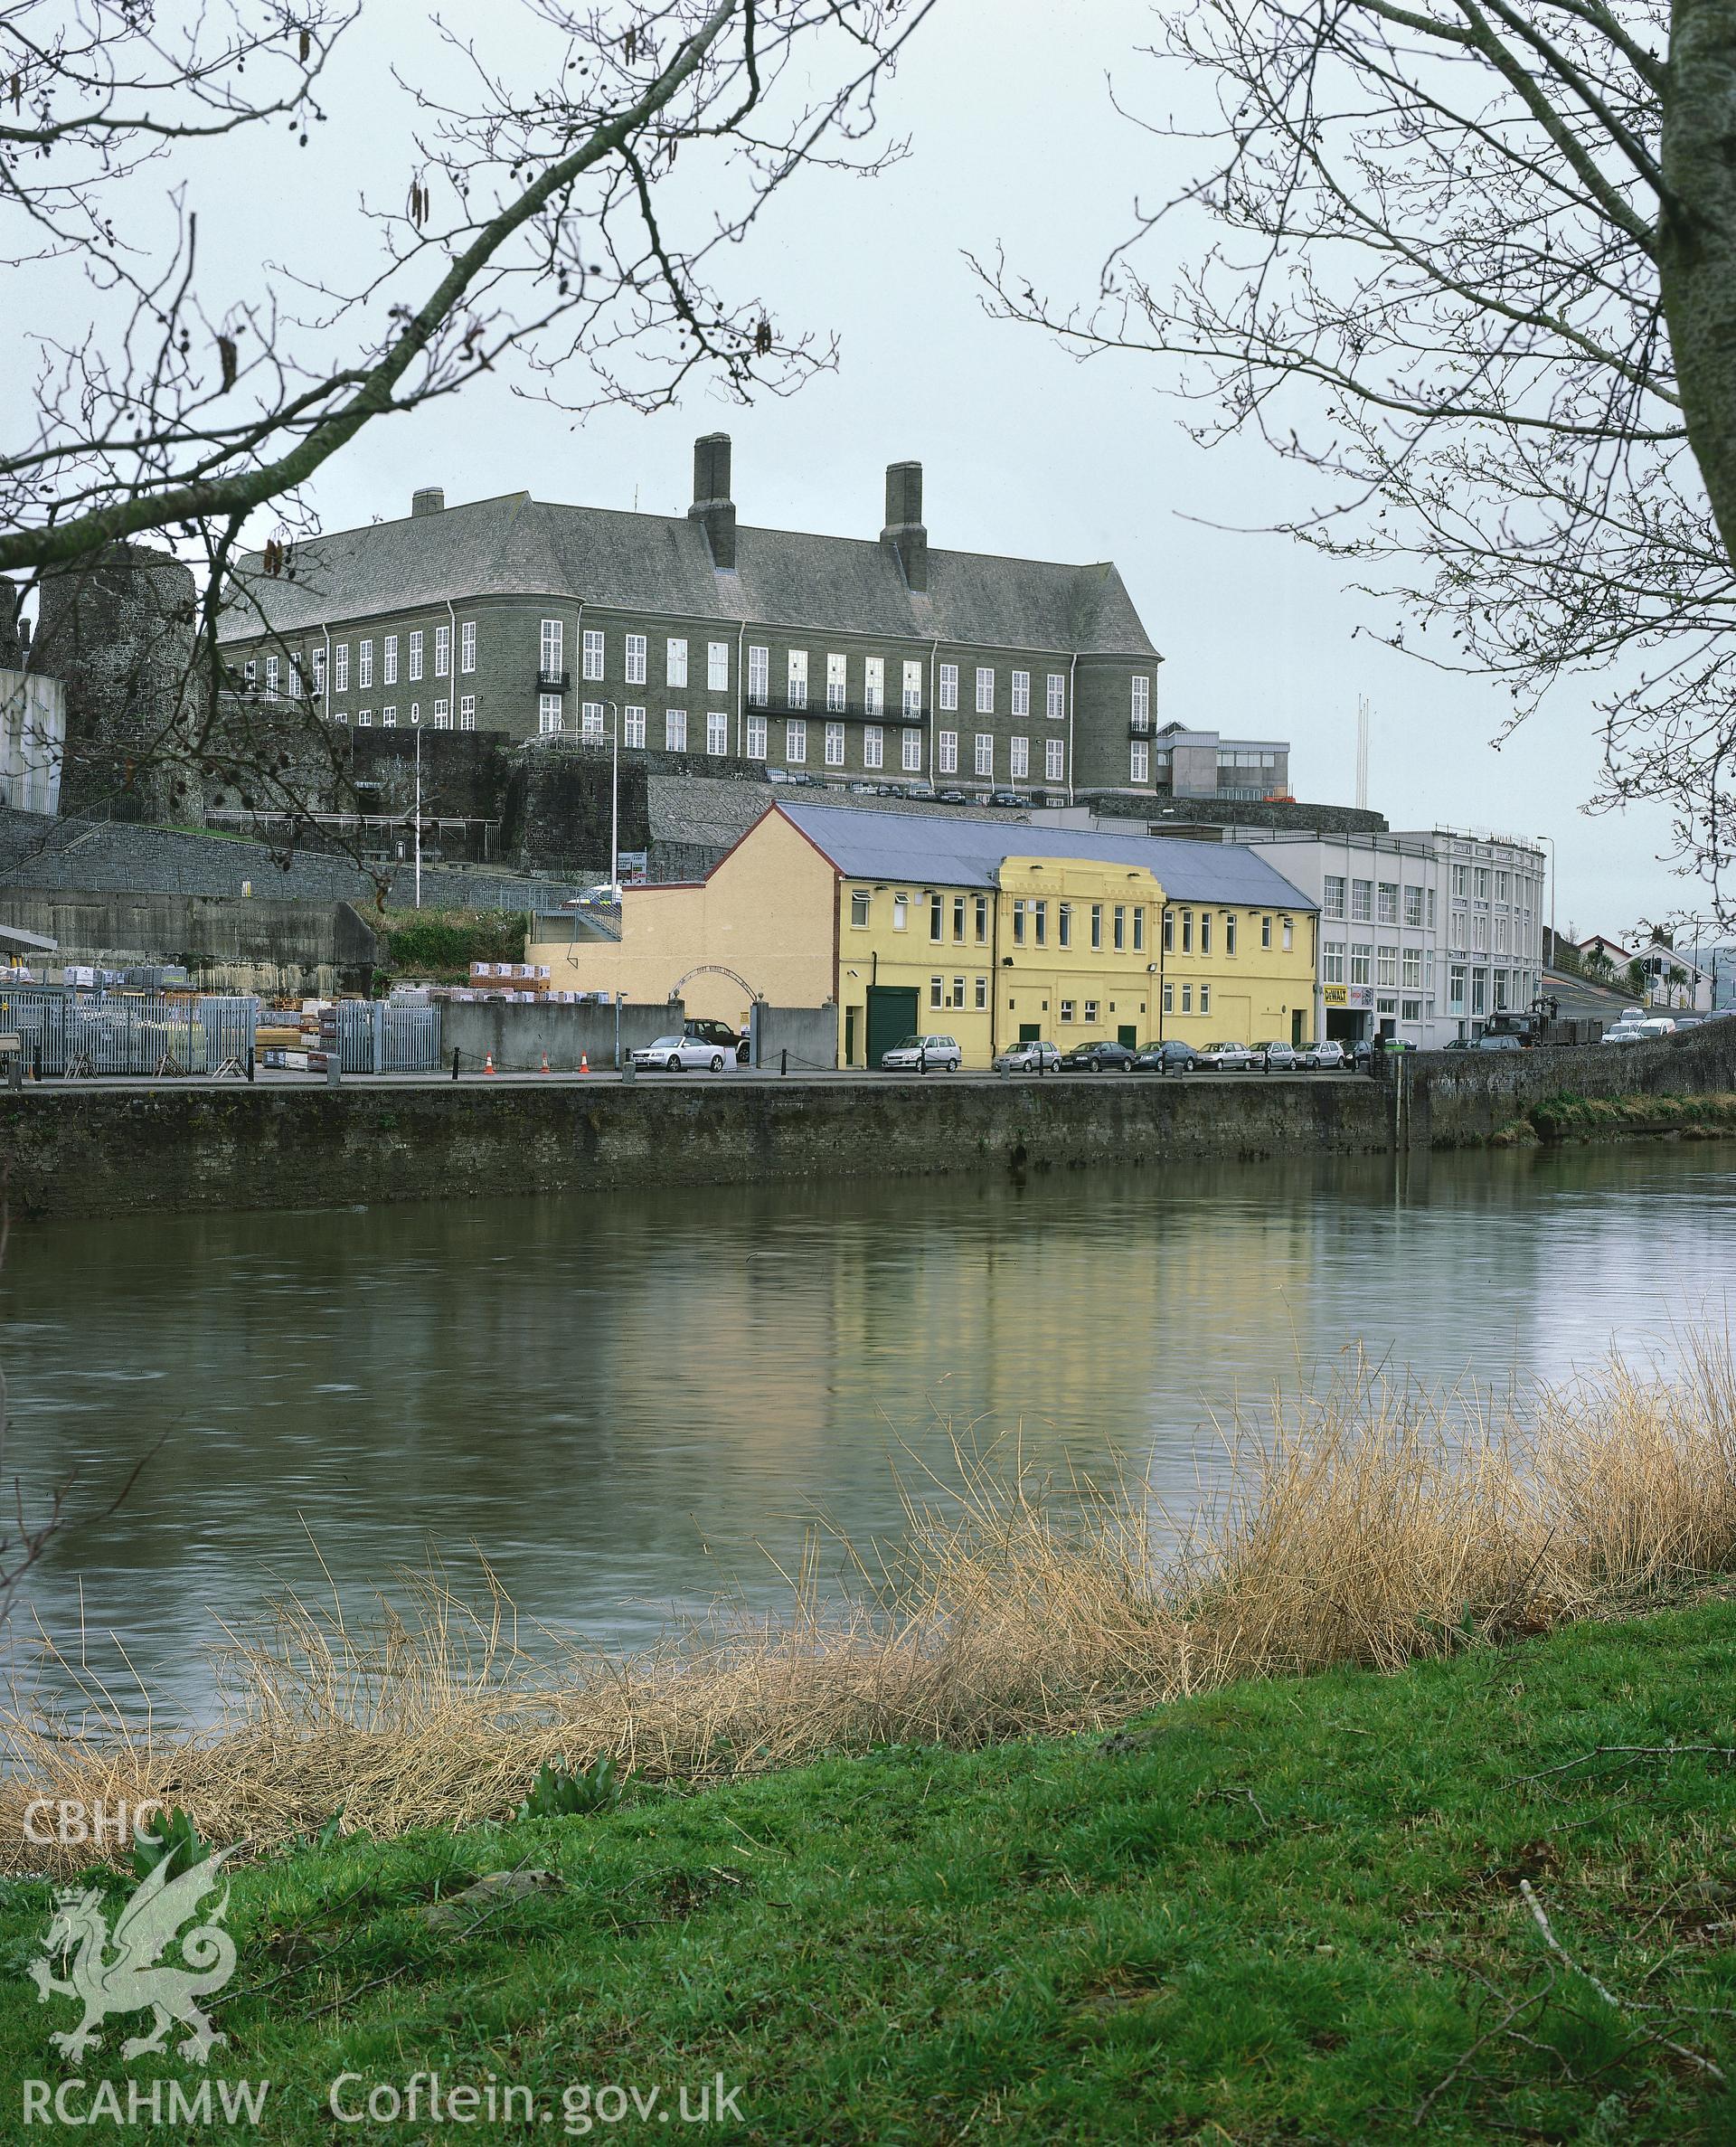 RCAHMW colour transparency showing County Hall, Carmarthen